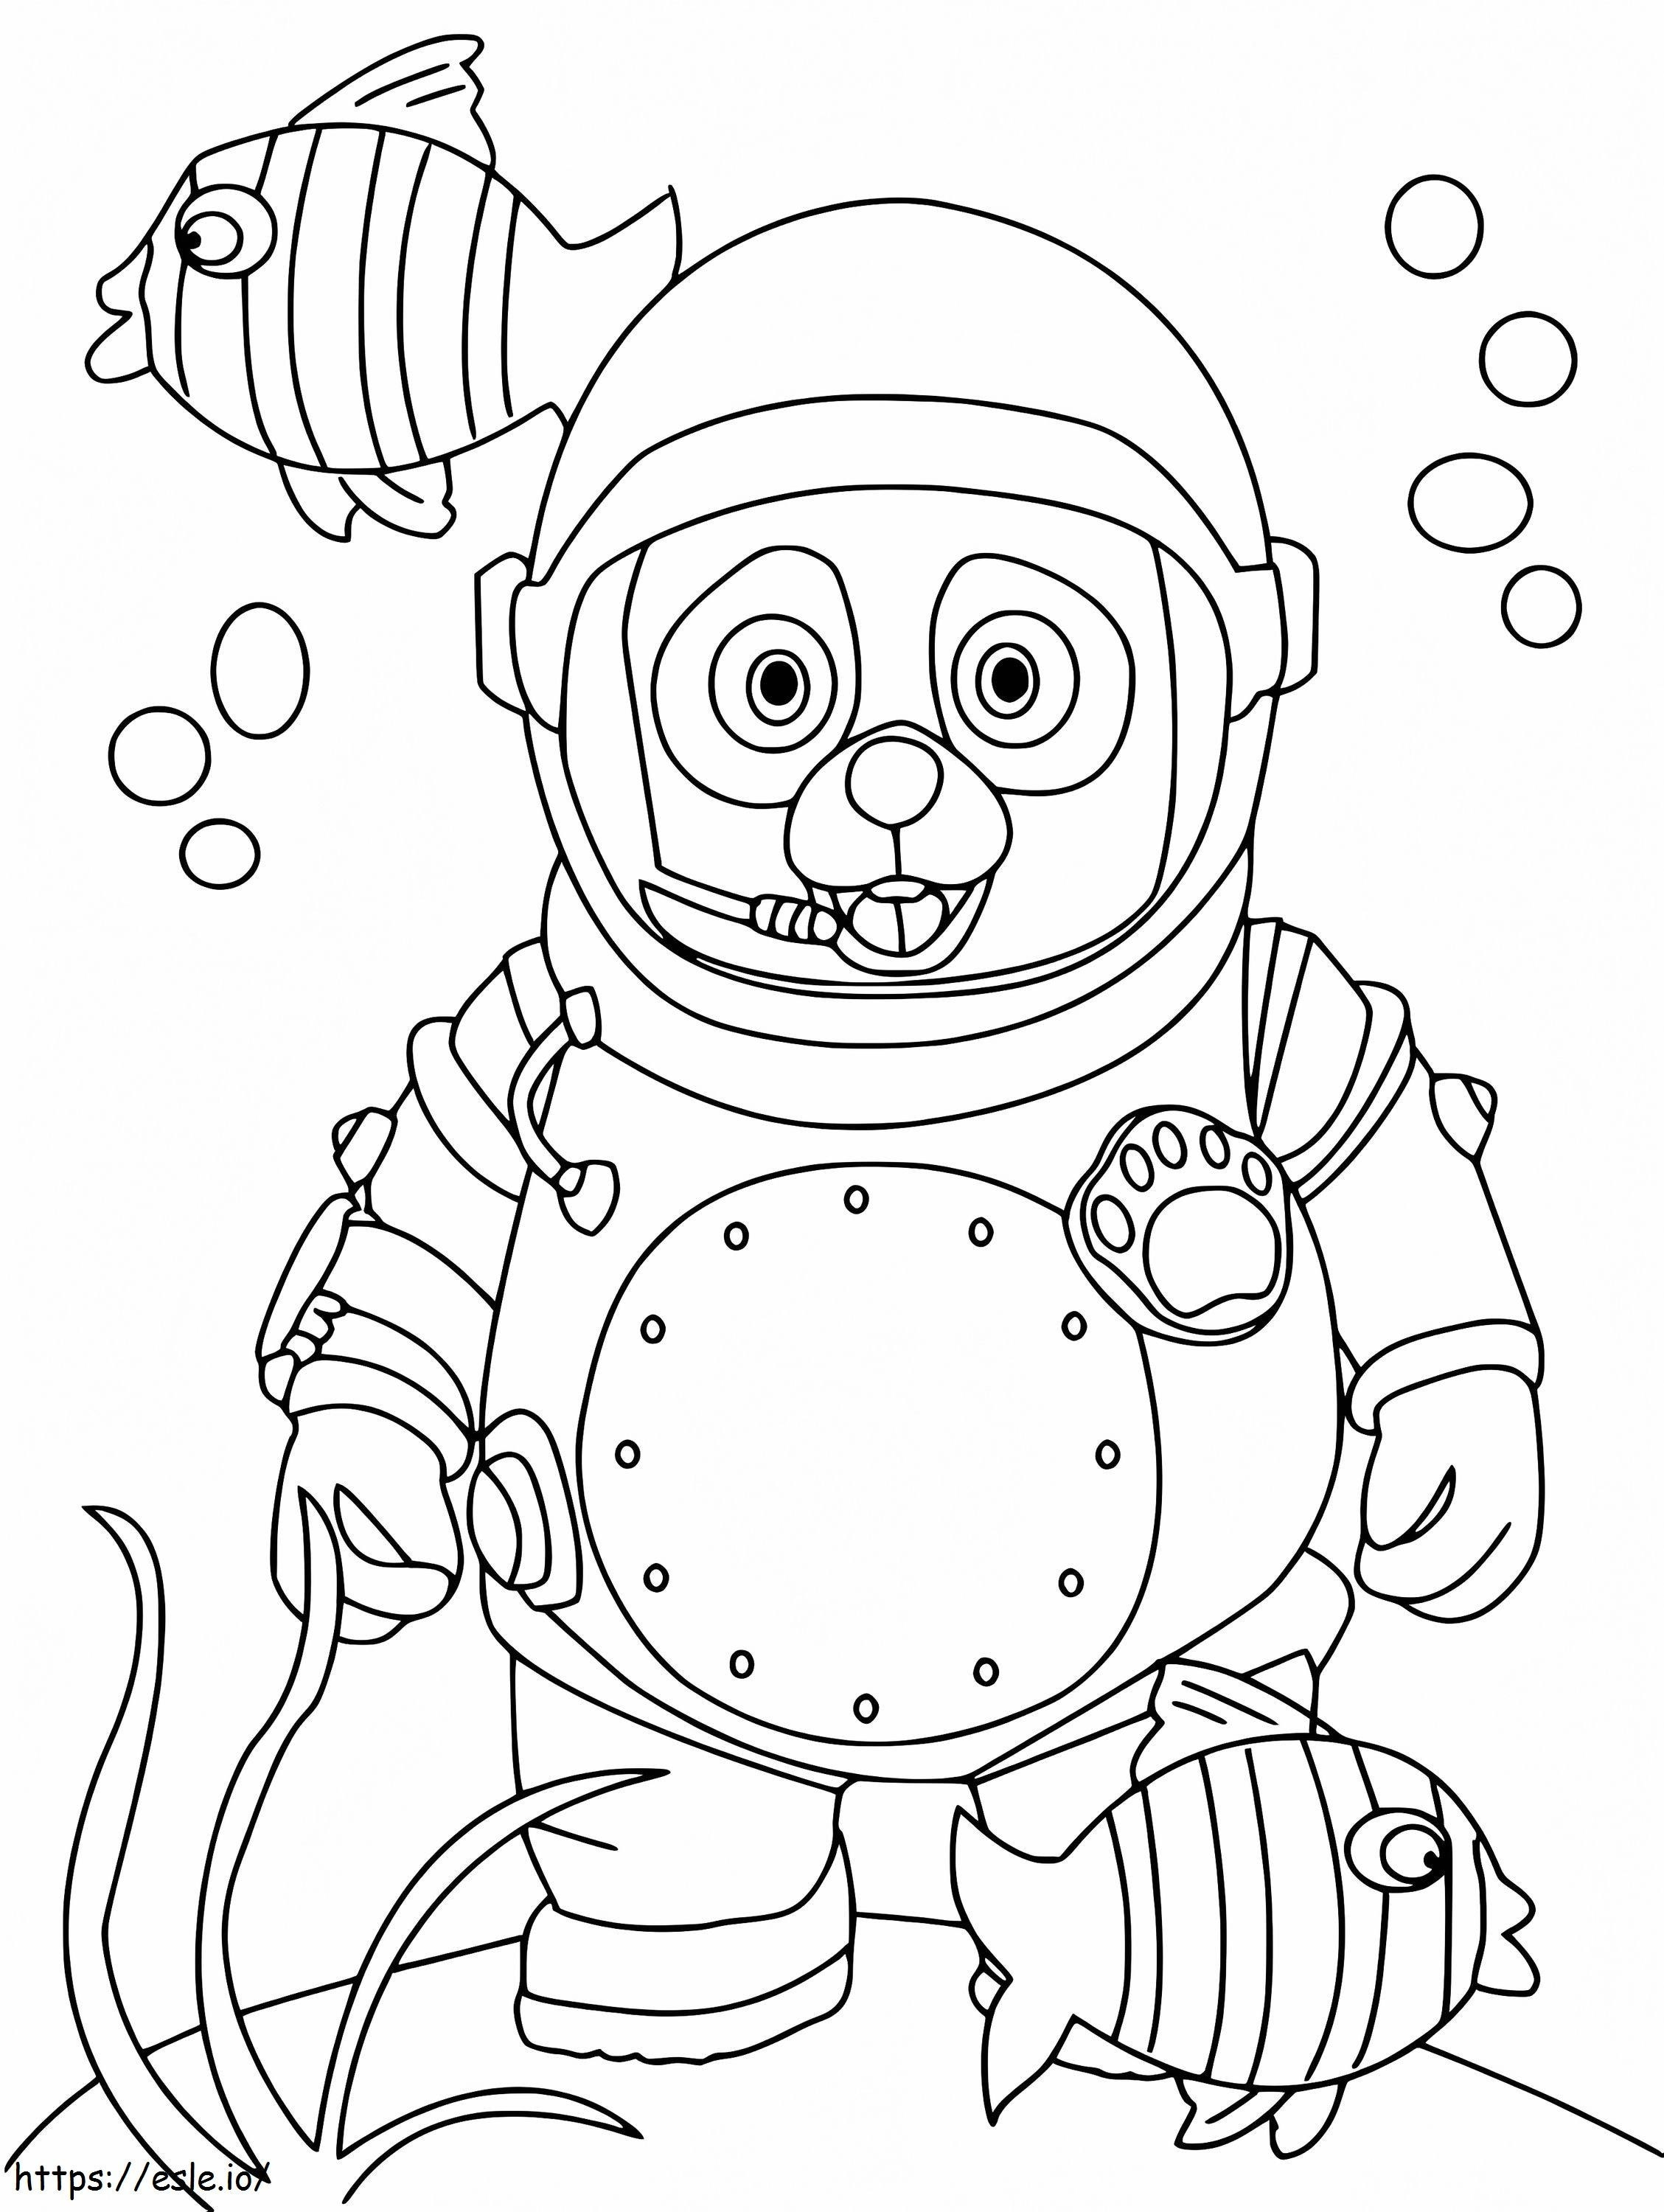 Agent Oso Diving coloring page